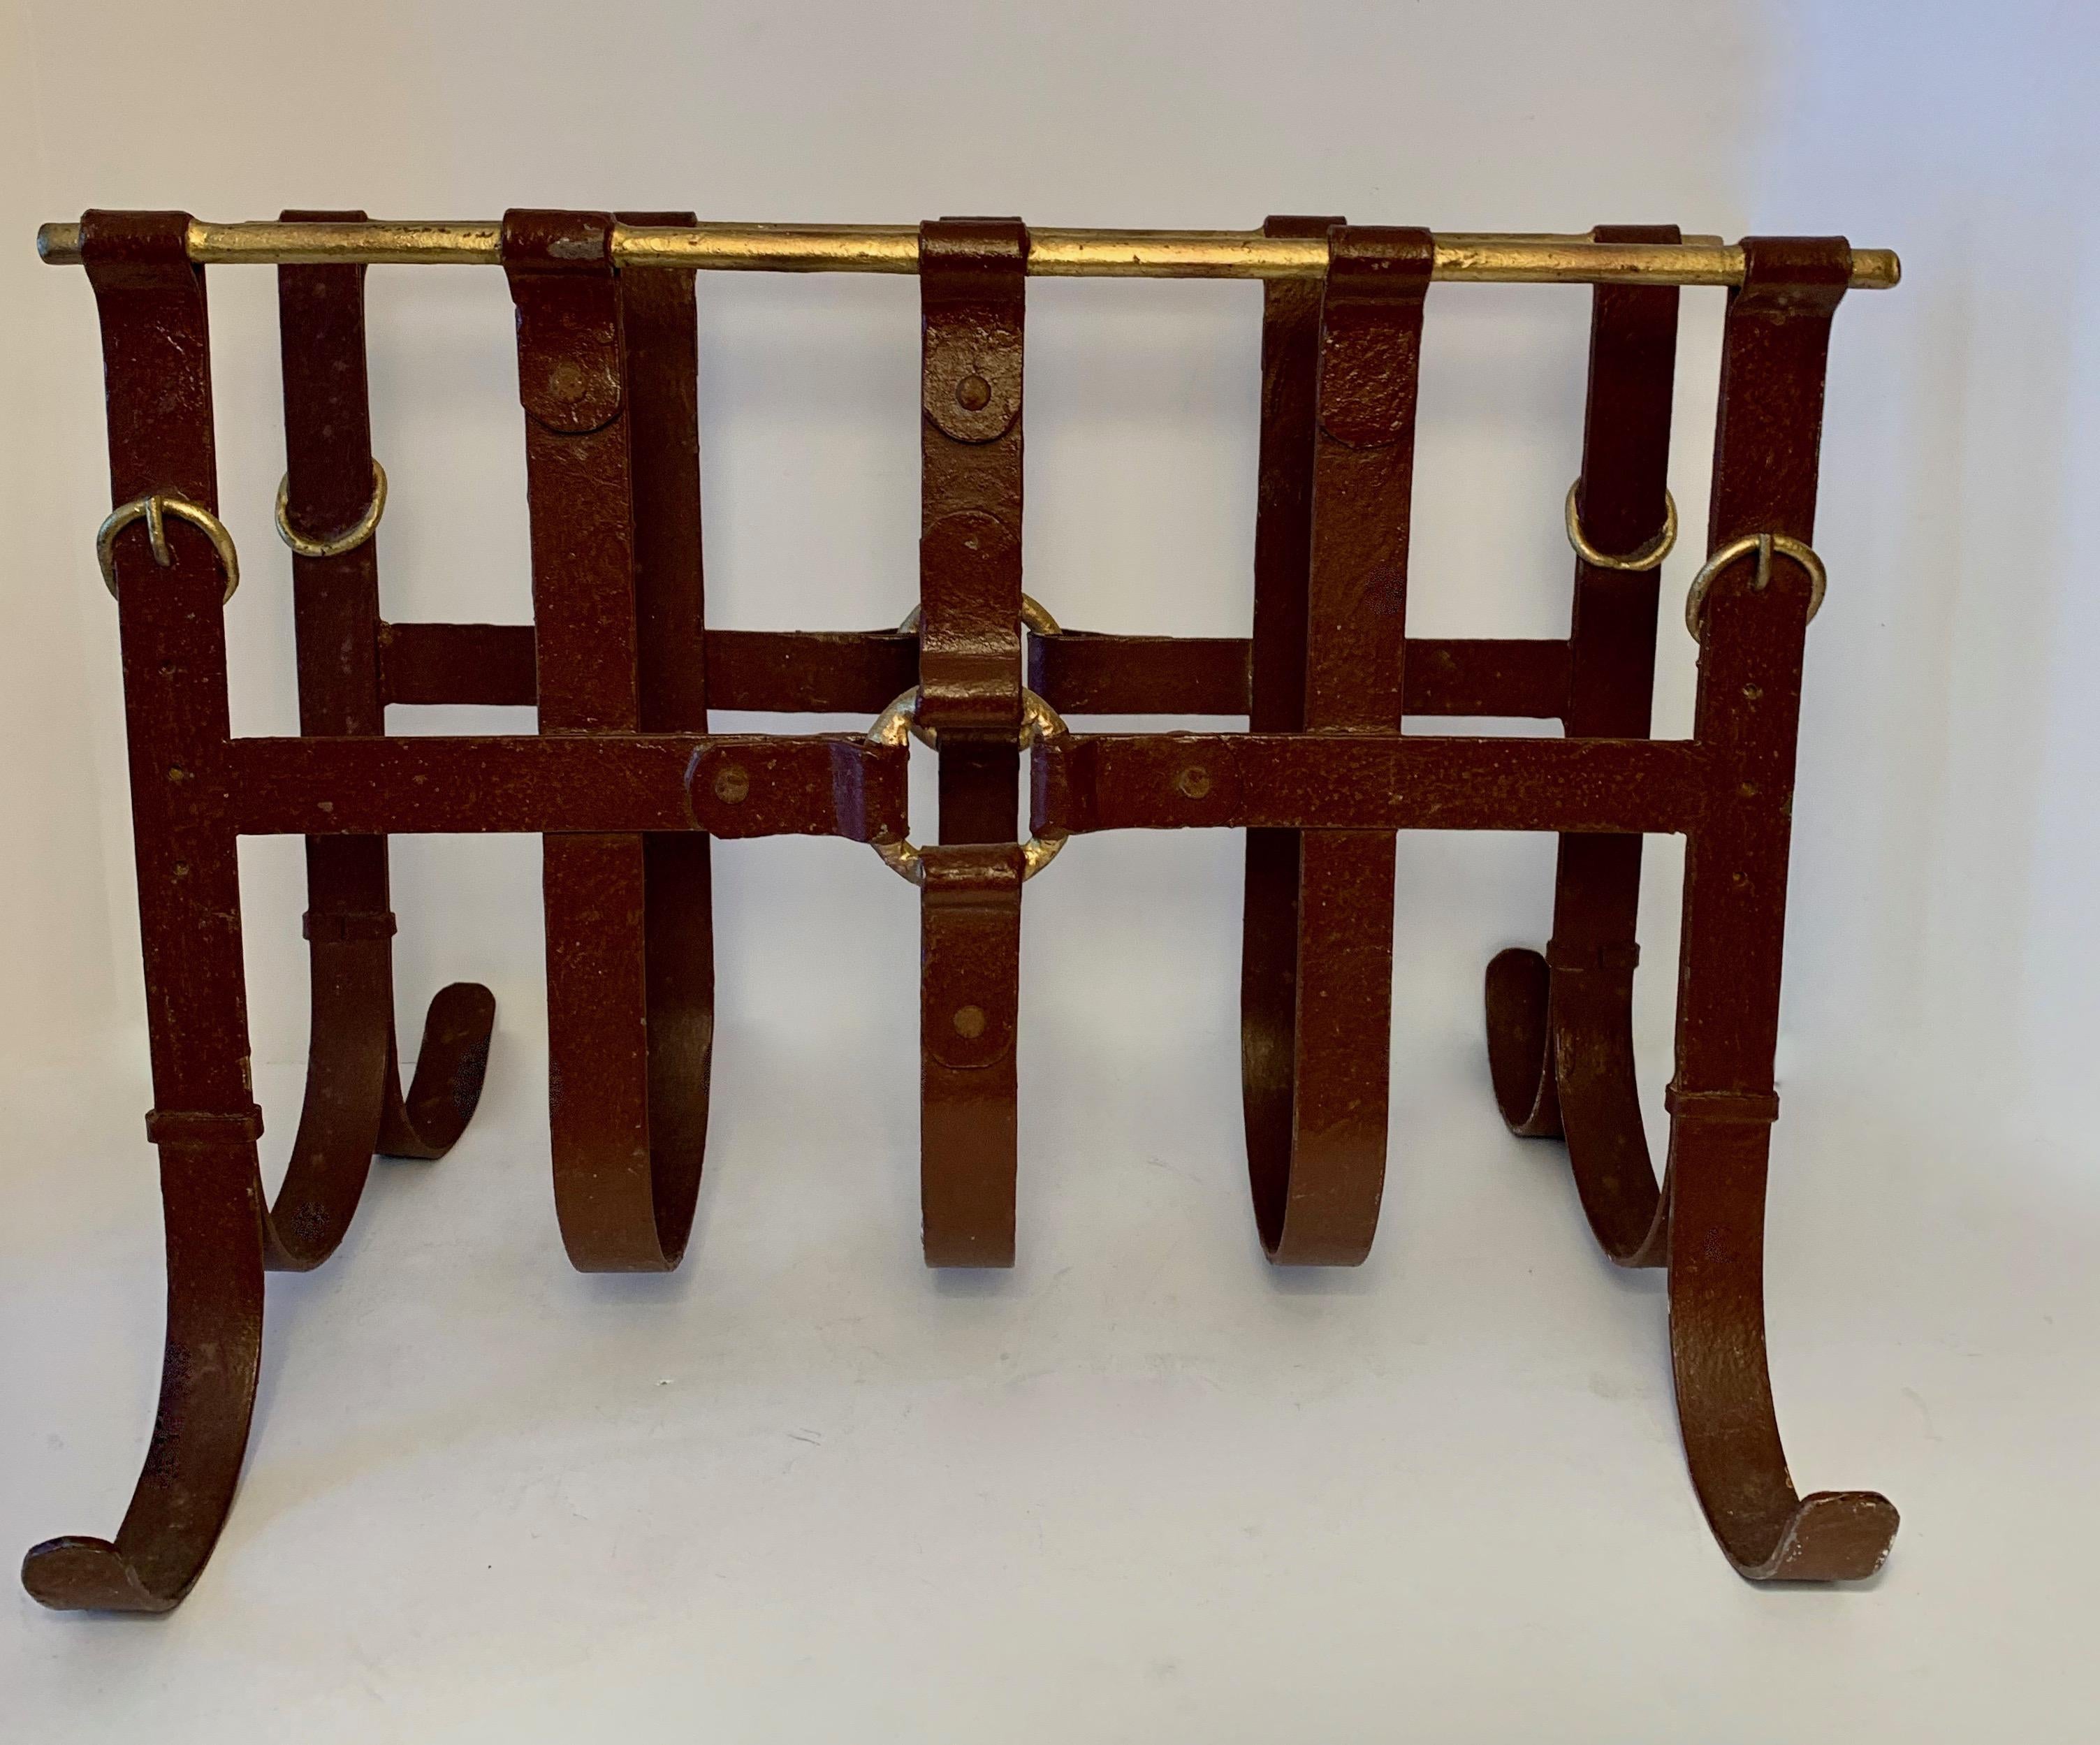 Iron magazine rack made of iron, painted to have a faux leather look and fitted with details reminiscent of gilt belt hardware - The look is reminiscent of Jacques Adnet.